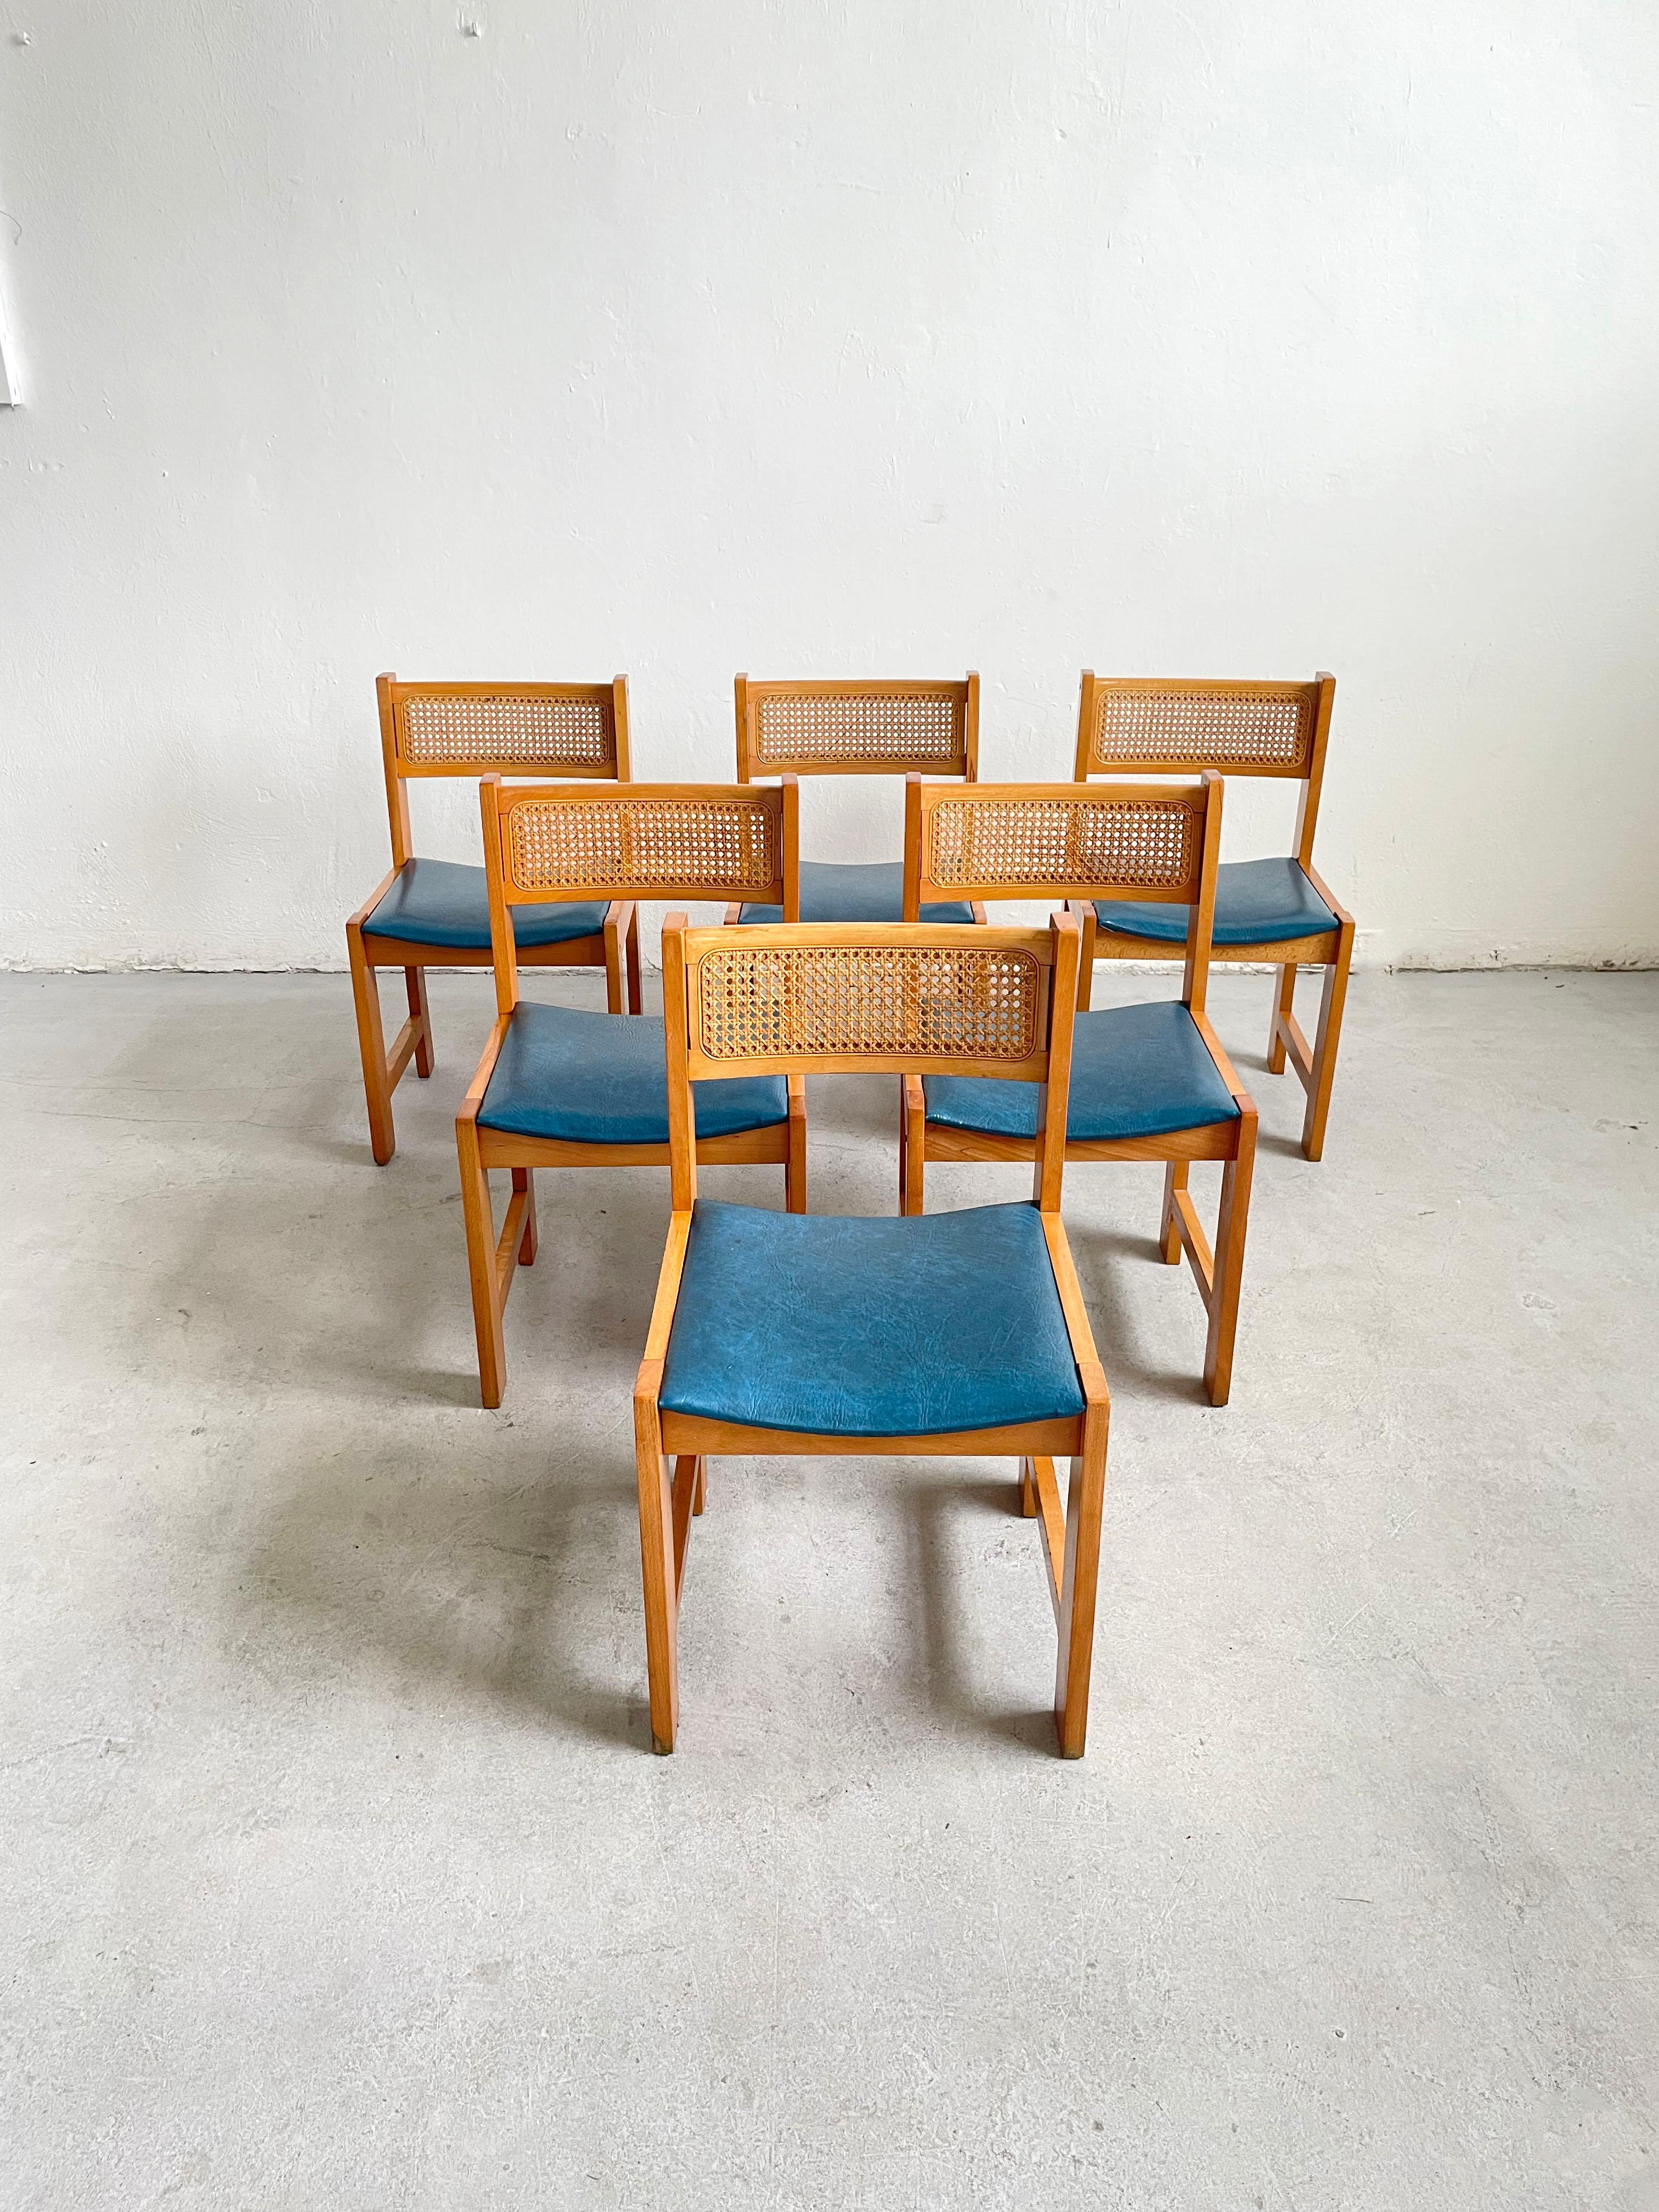 Varnished Set of 6 Mid-Century Cane Rattan and Vinyl Wooden Dining Chairs, 1960s 1970s